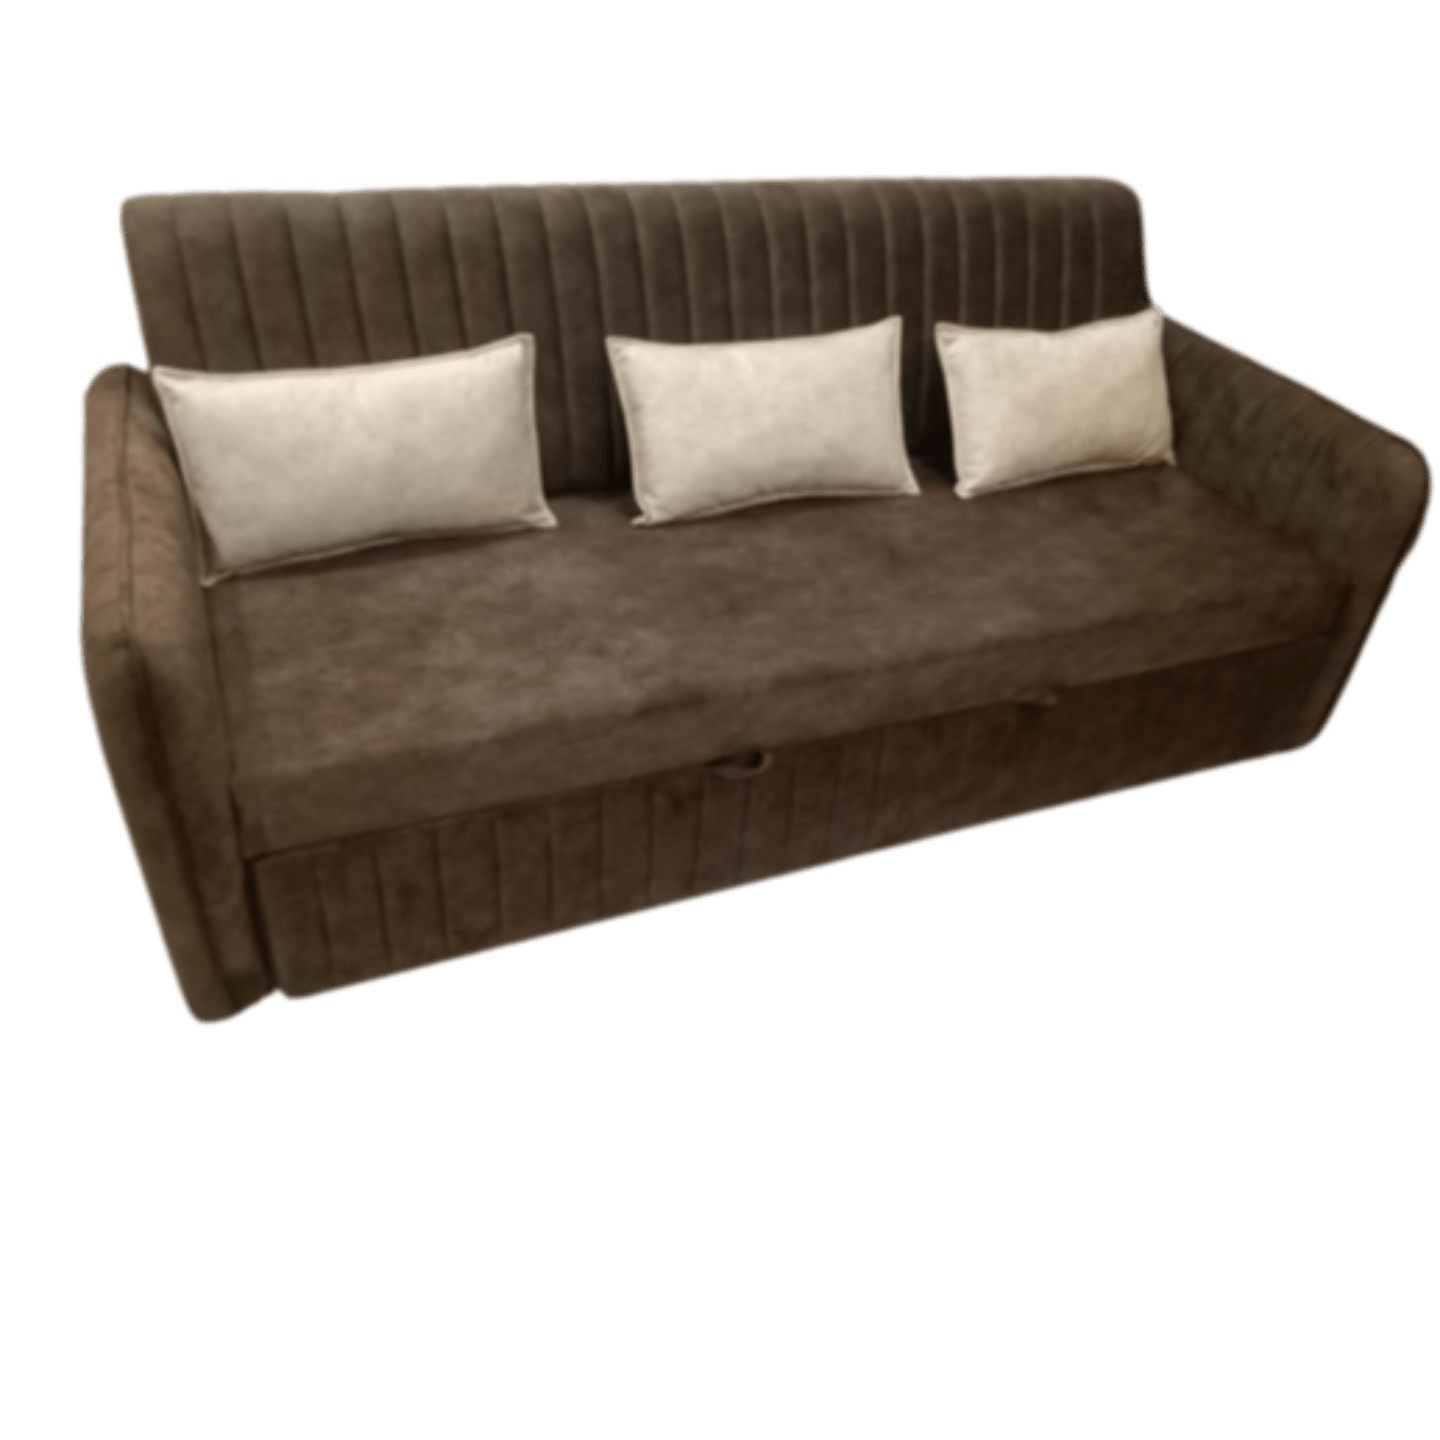 NF Sofa Cam Bed New Design In Brown Colour